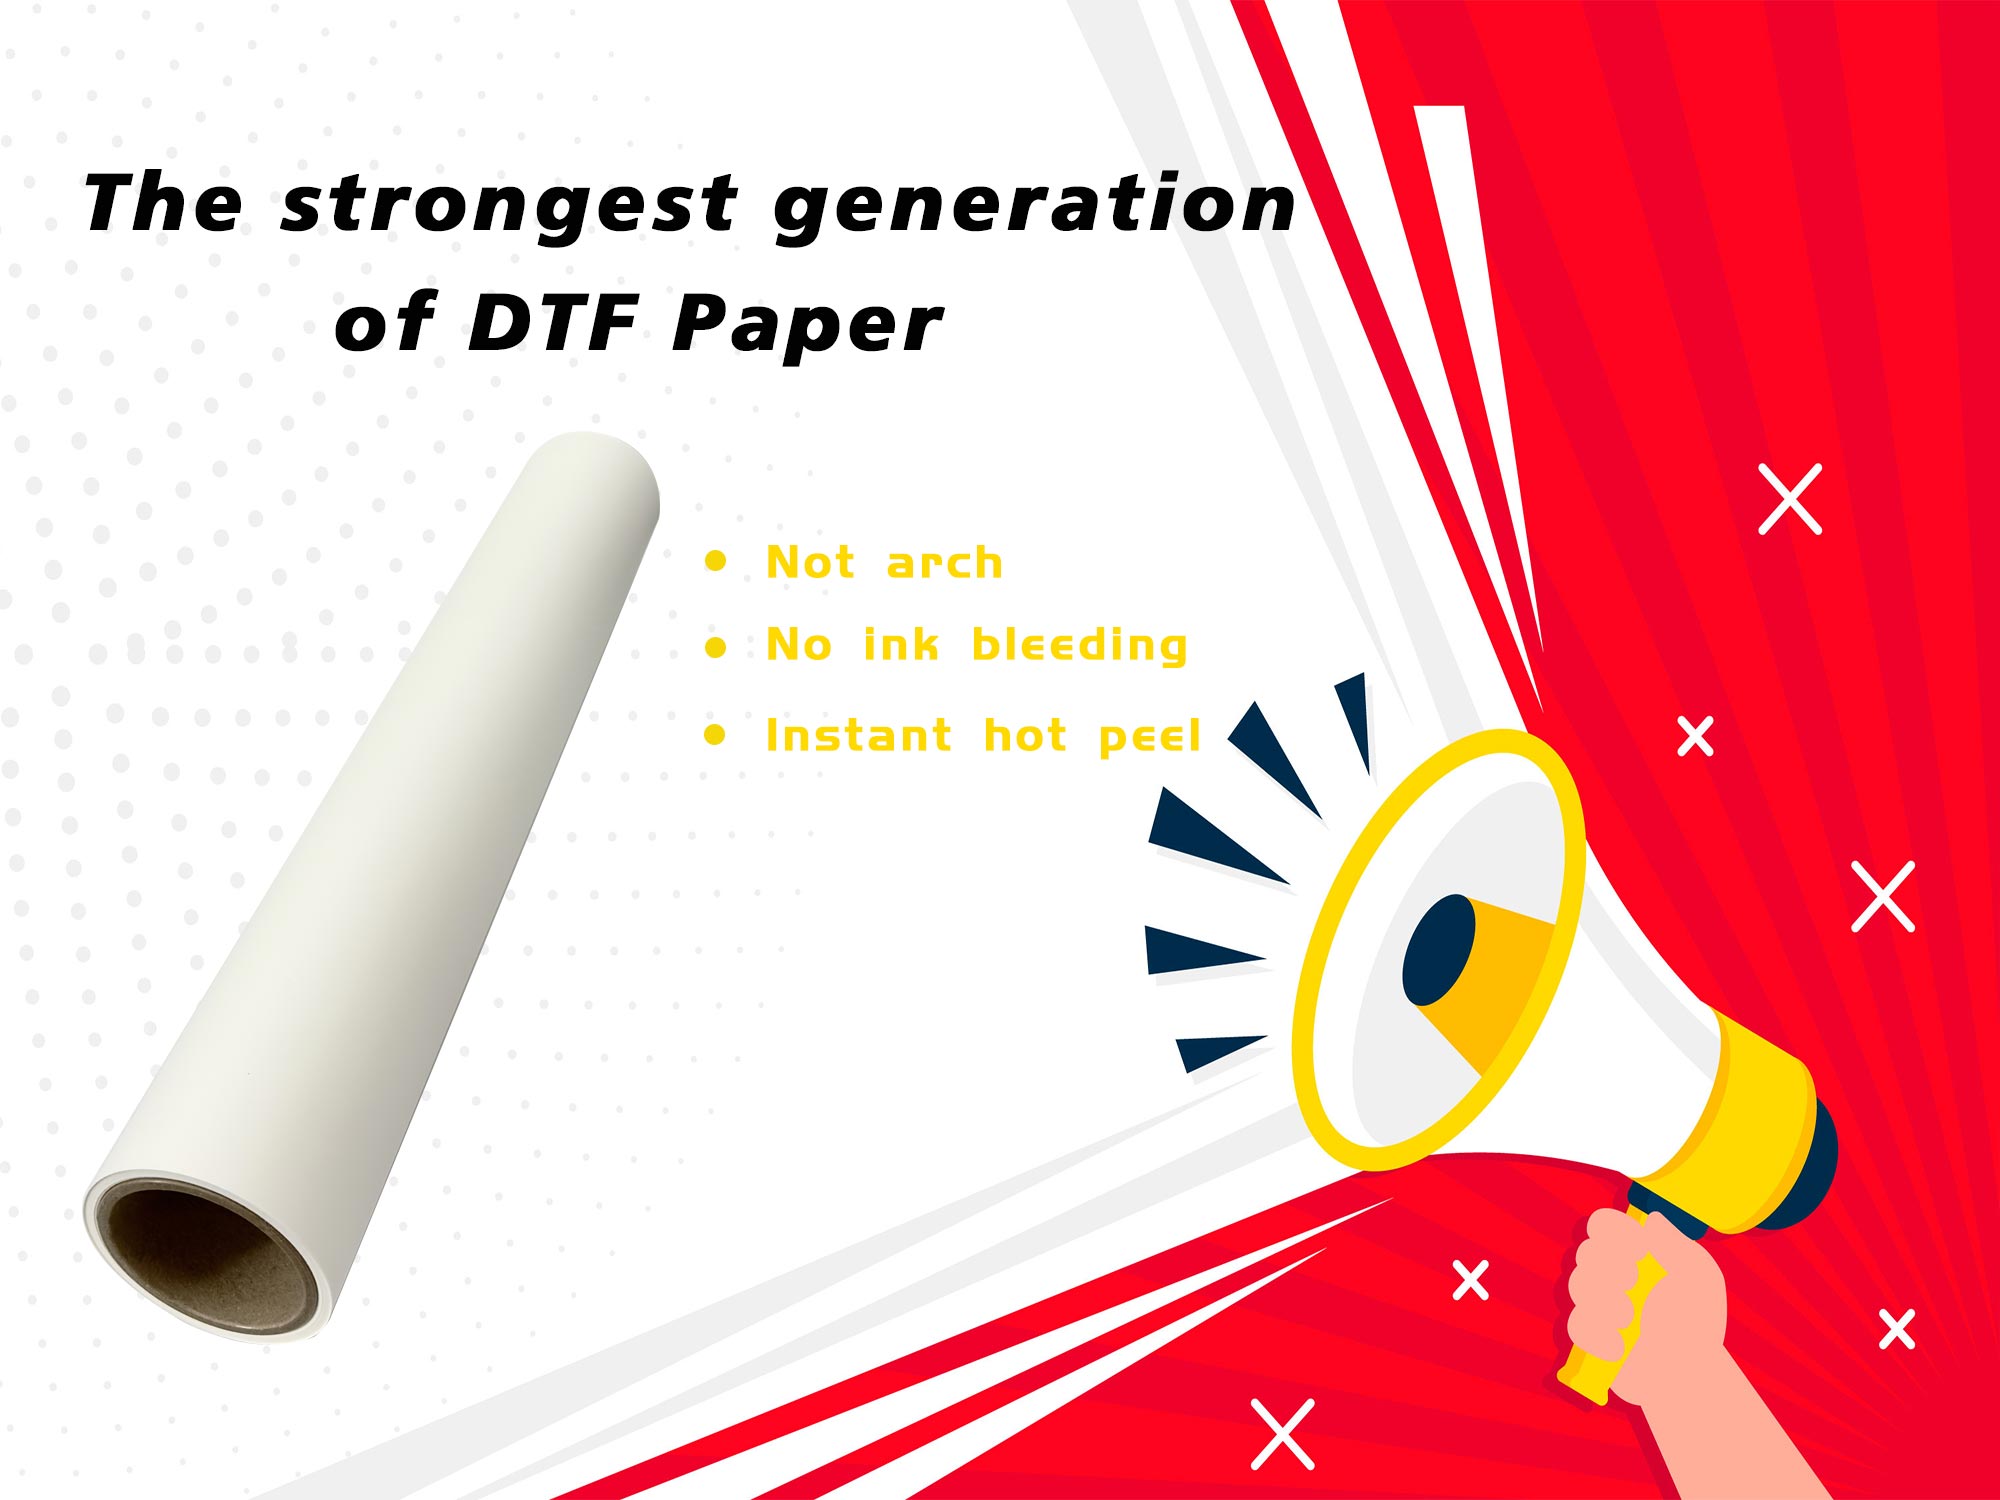 Excellent performance of PrintWant‘s DTF Paper